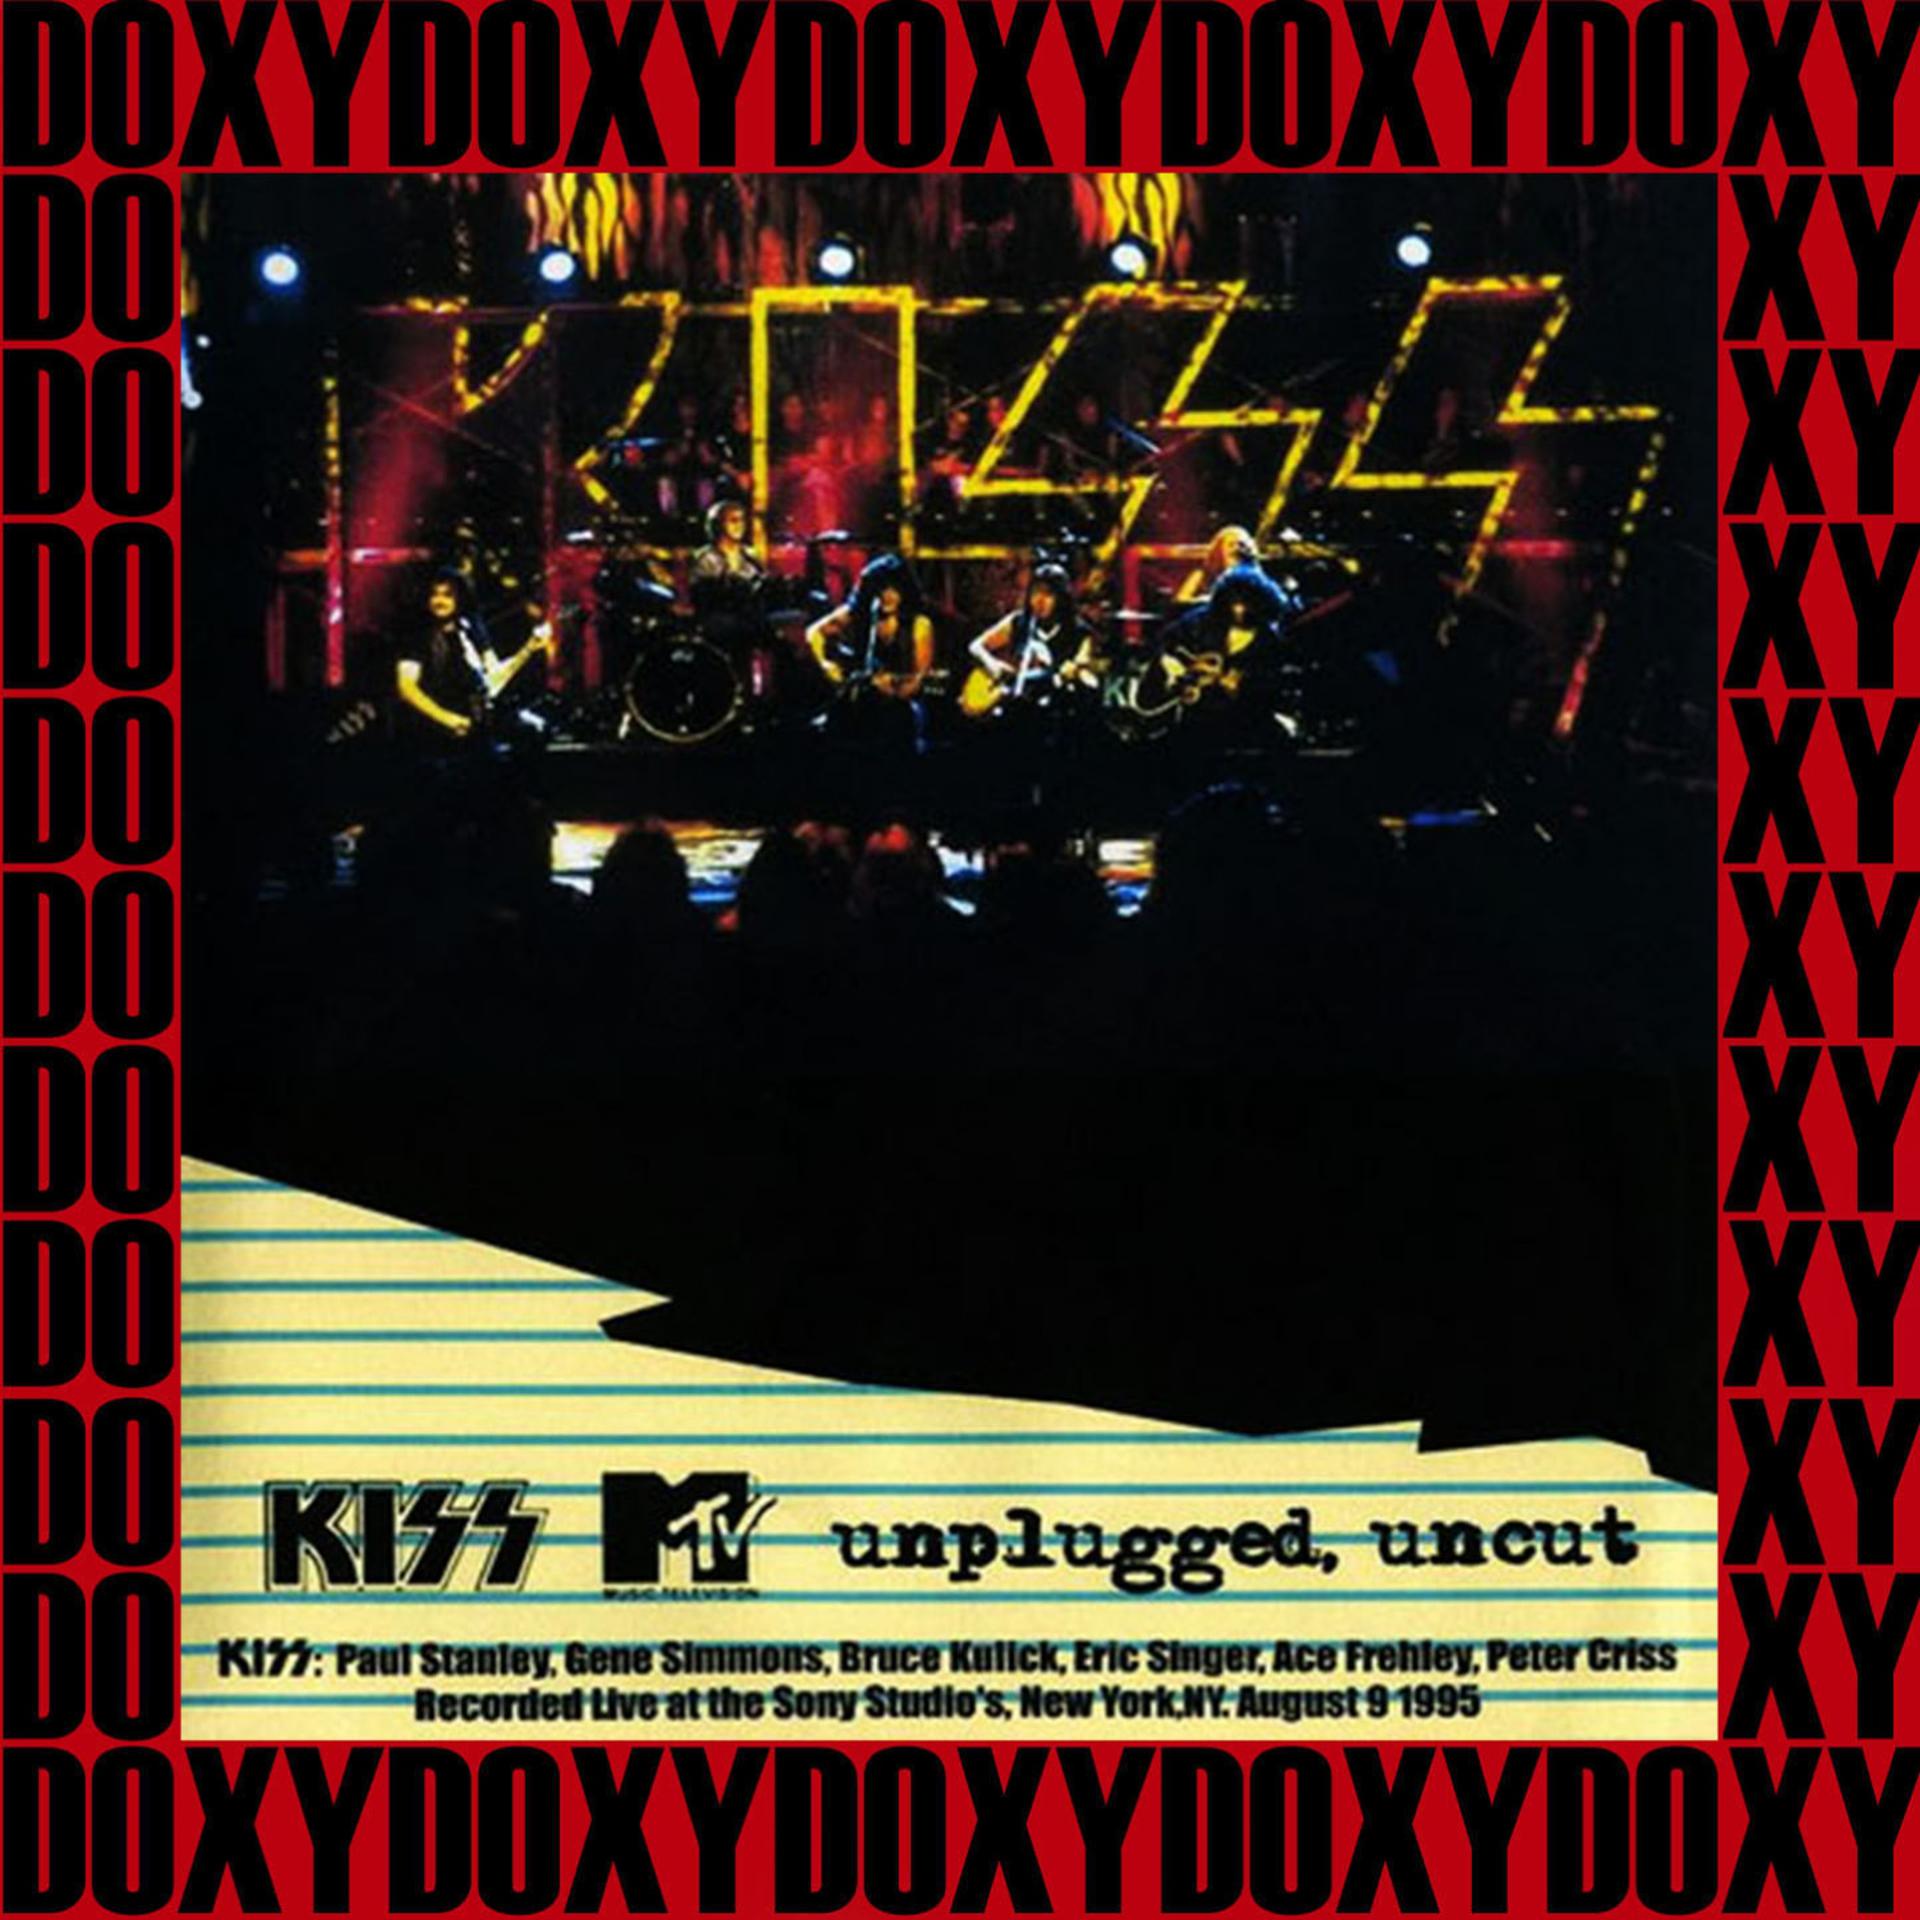 Постер альбома MTV Unplugged Uncut, Sony Studios, New York, August 9th 1995 (Doxy Collection, Remastered, Live on Broadcasting)